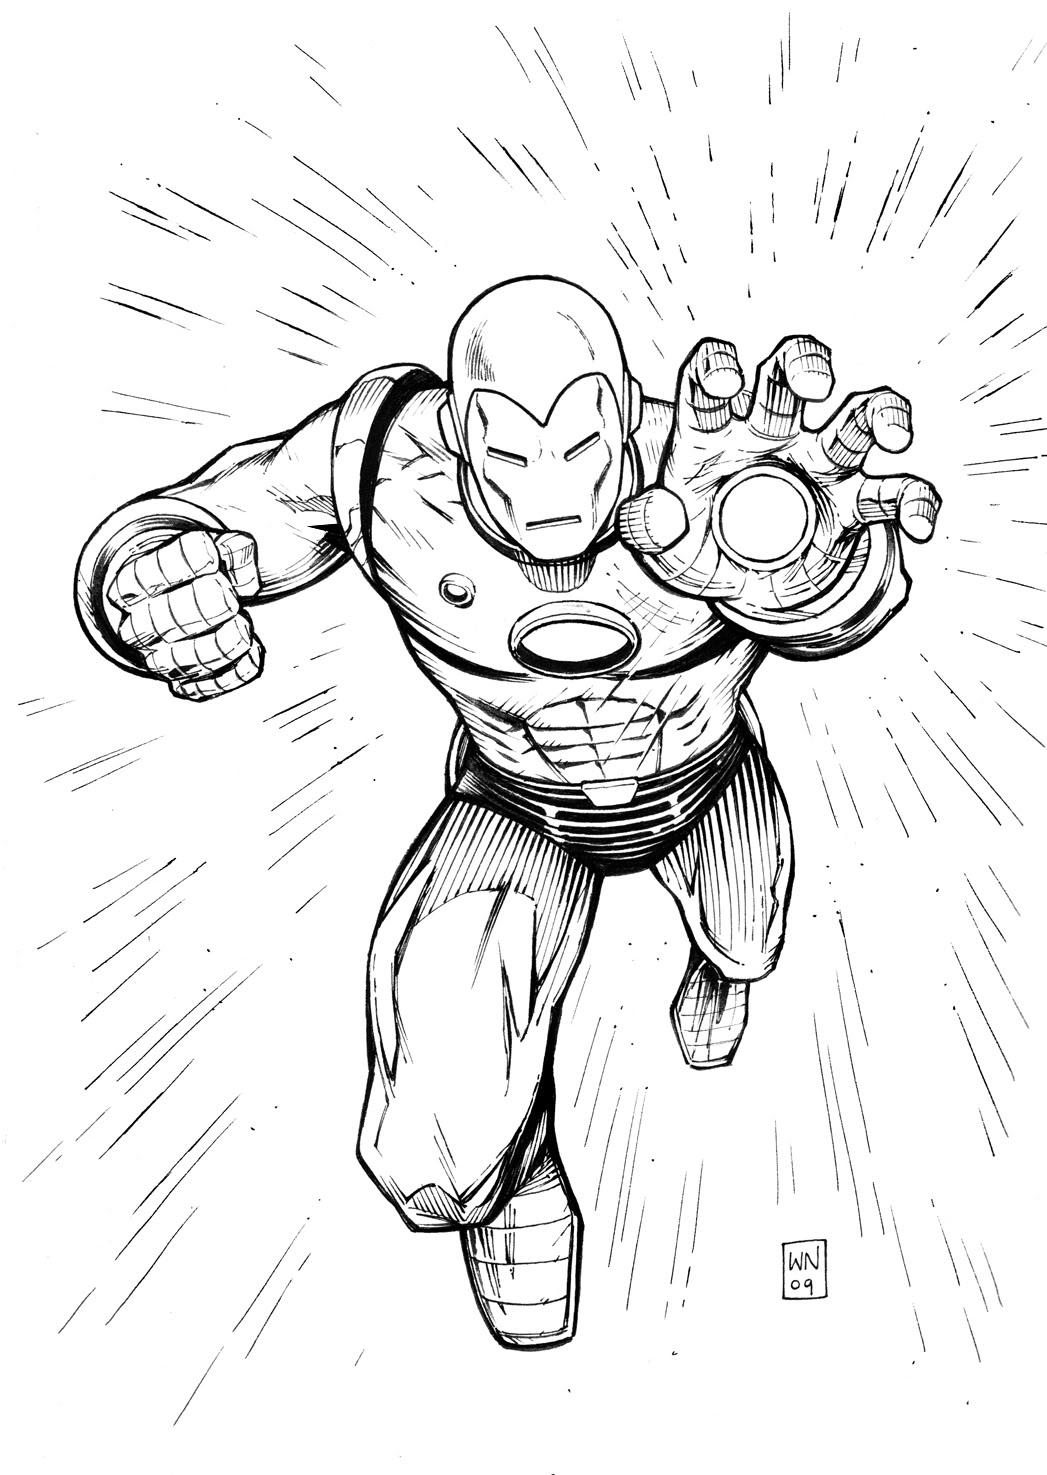 Download Free Printable Iron Man Coloring Pages For Kids - Best ...